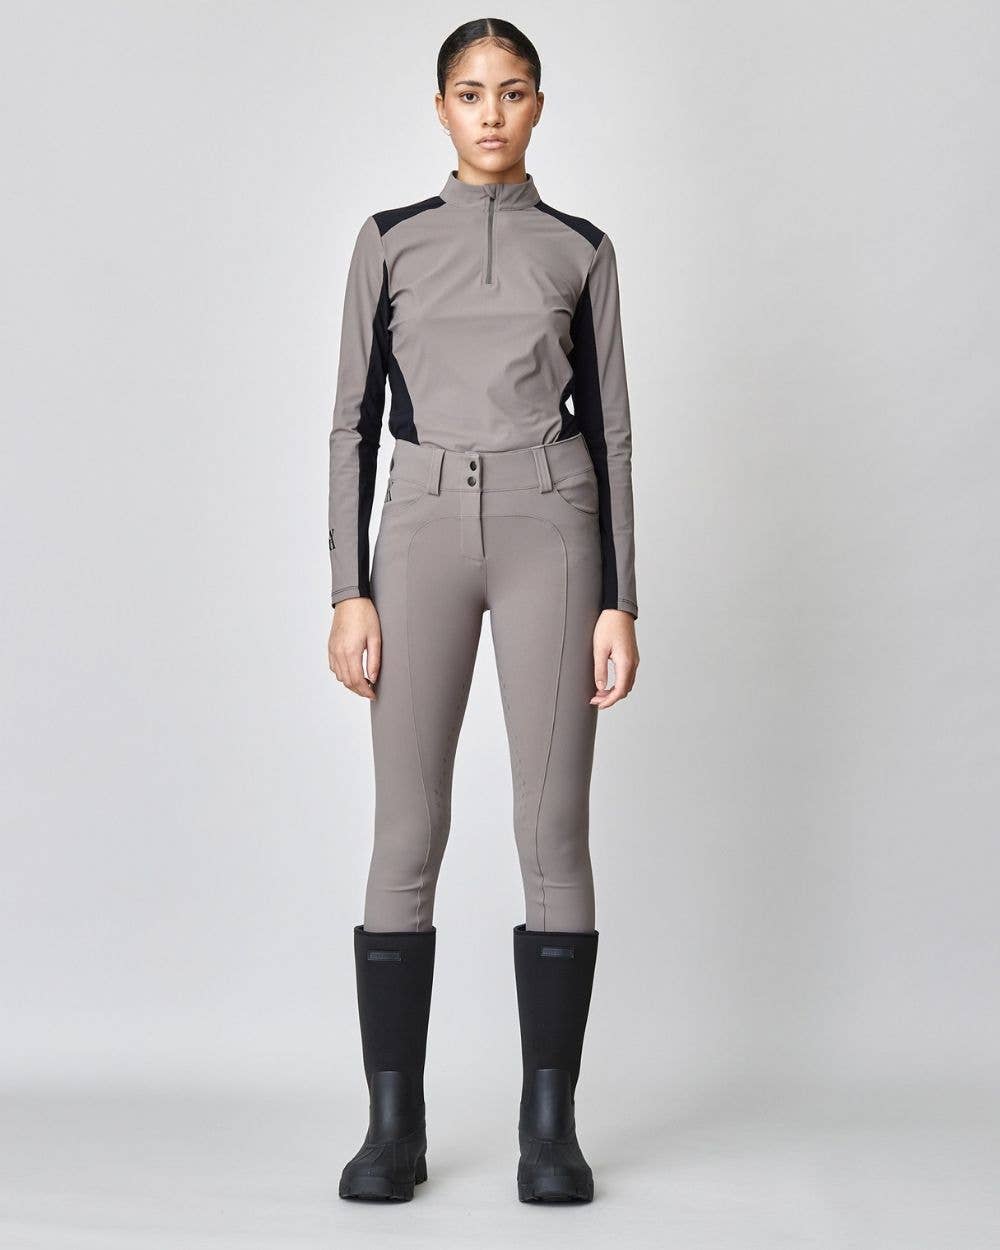 Classic Italian Jersey Full Seat Breeches in Taupe